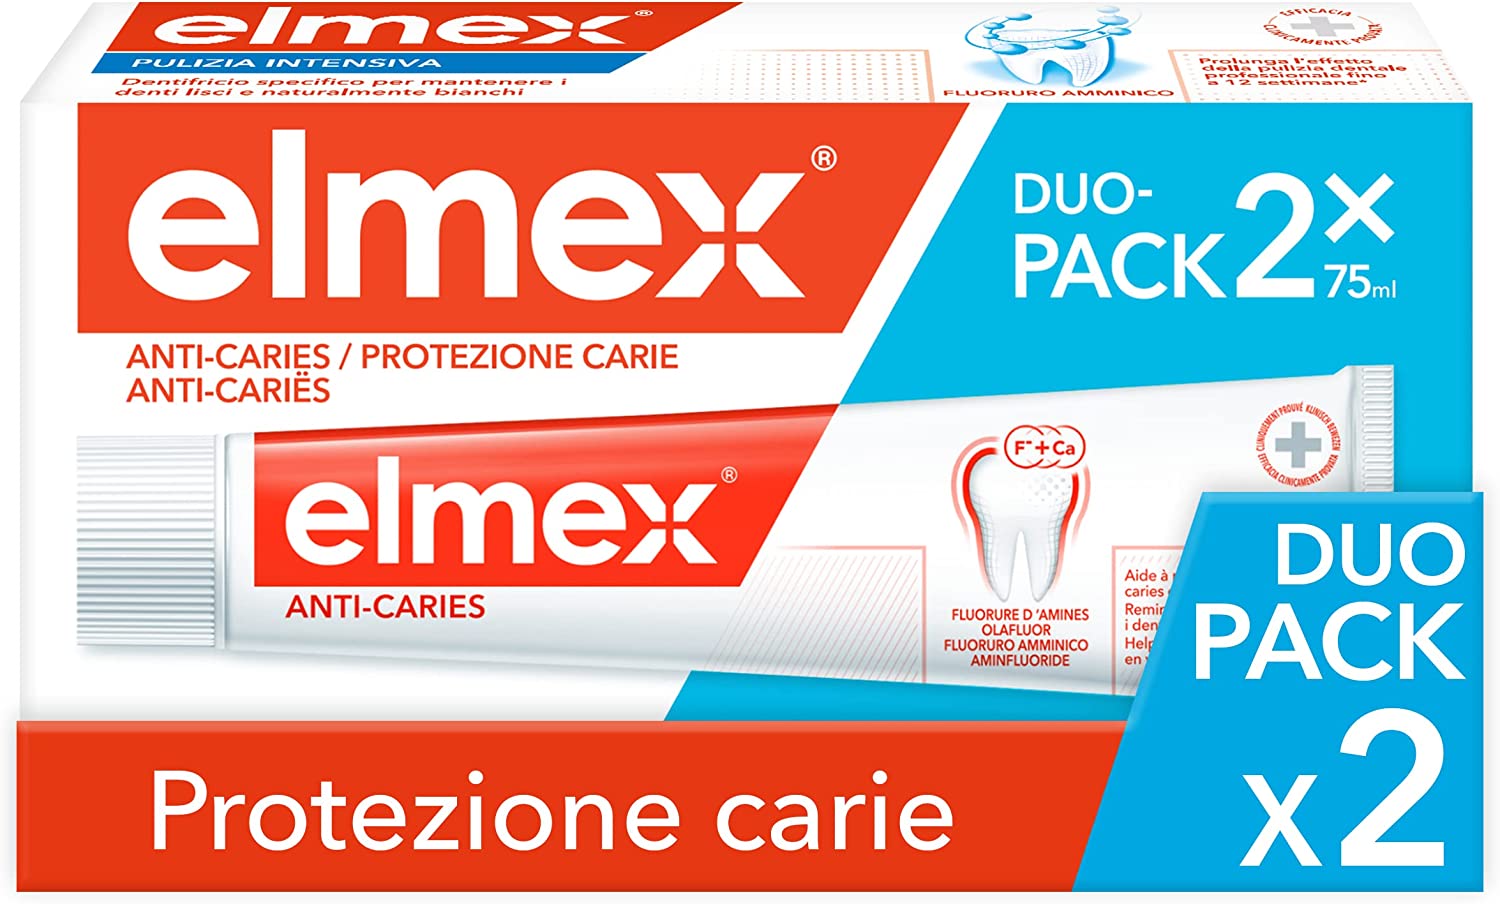 Elmex Anti-Decays/Caries Toothpaste 2 x 75ml RRP 10.99 CLEARANCE XL 7.99